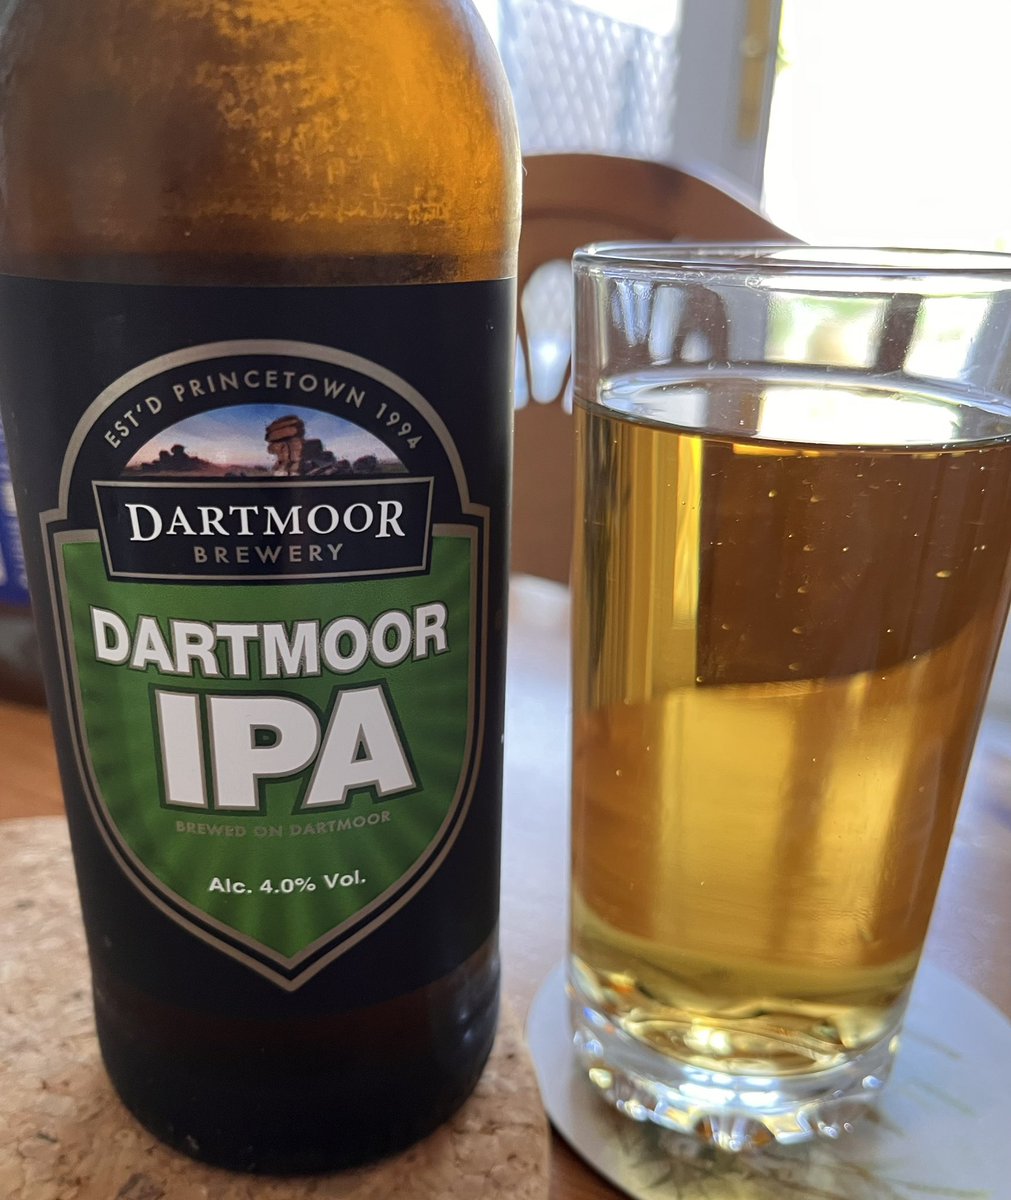 Trying a new beer today - @DartmoorBrewery IPA. Have you tried this yet @CraigHughes123